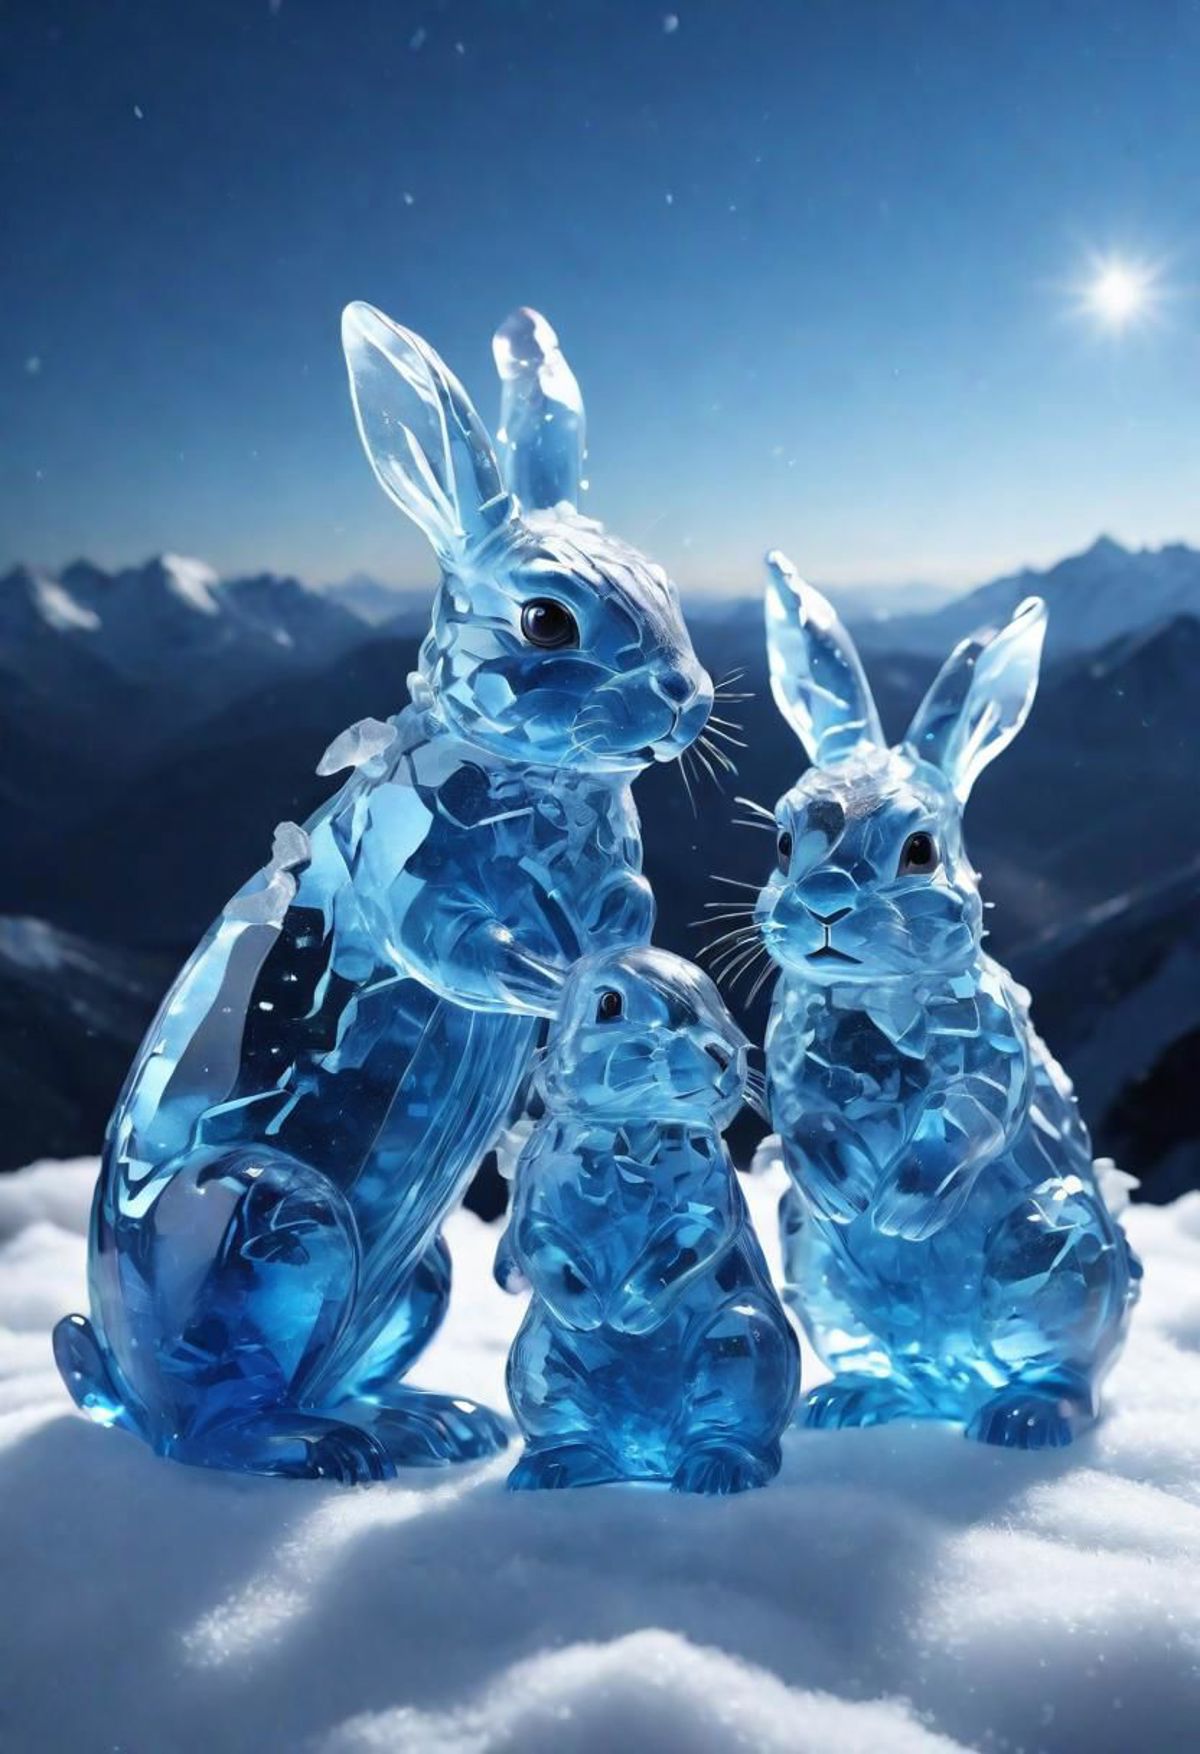 A Group of Three Blue Glass Bunnies Sitting in the Snow